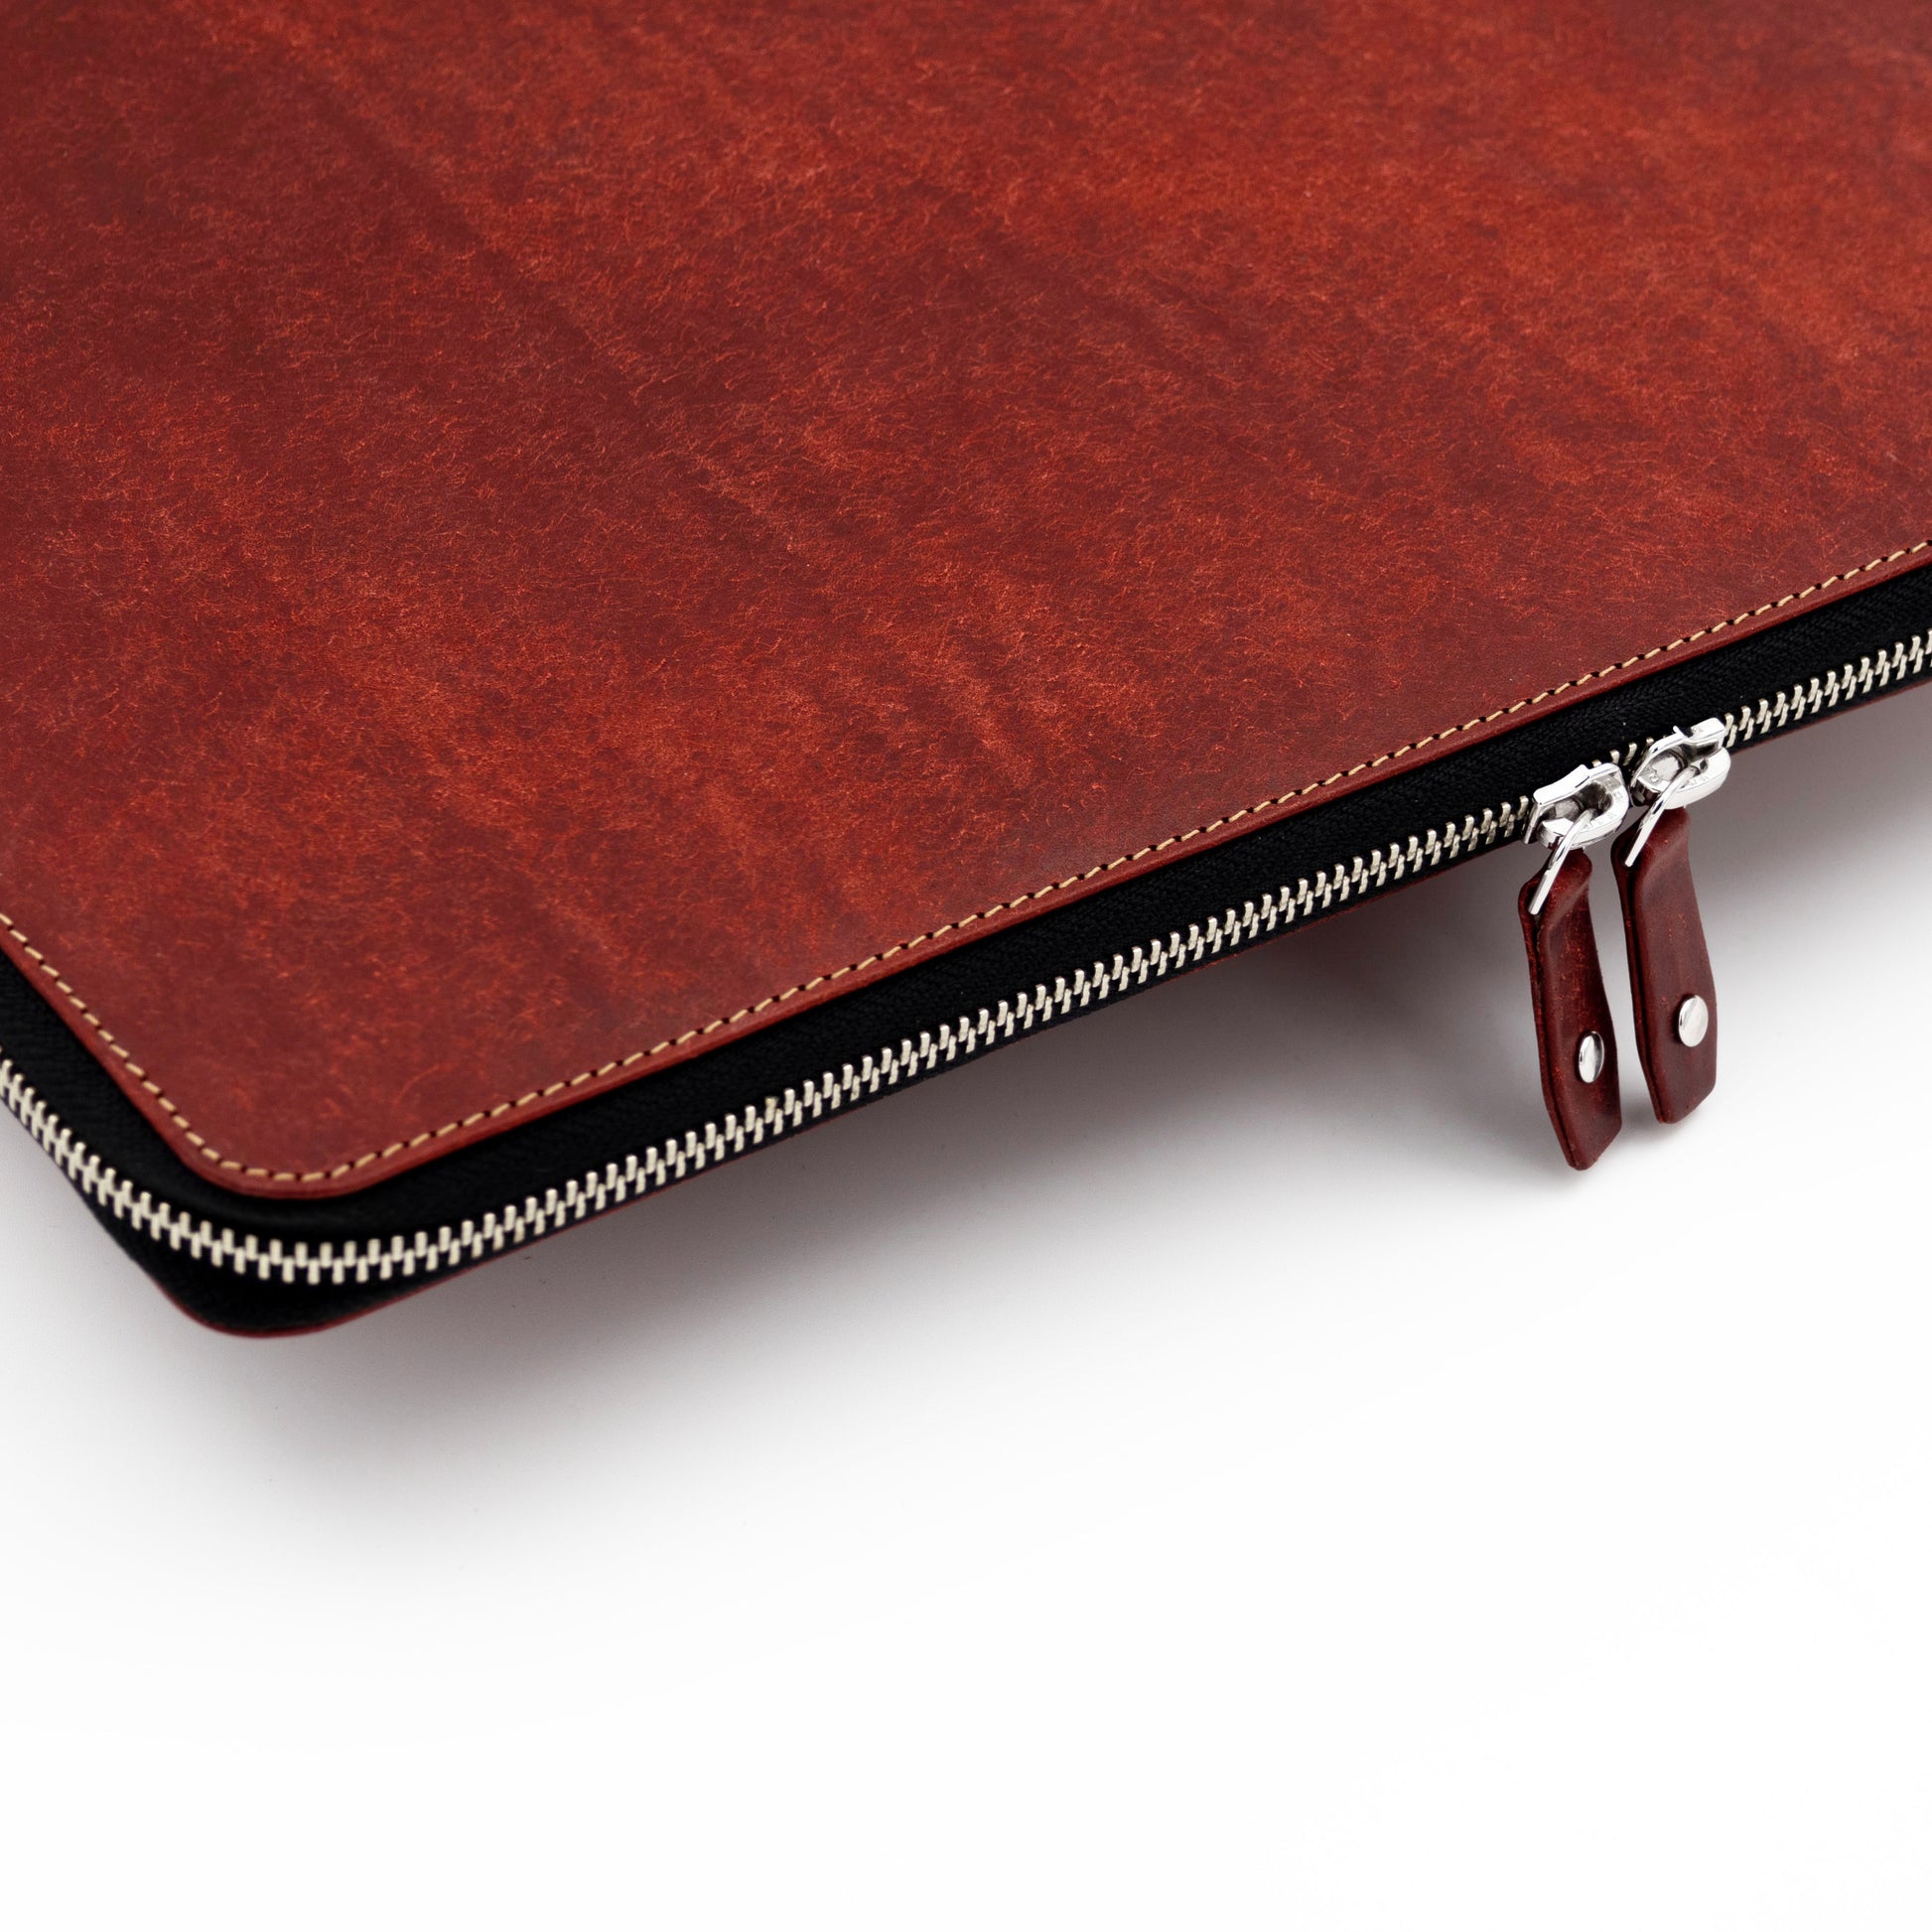 Apple MacBook case in leather with double zippers